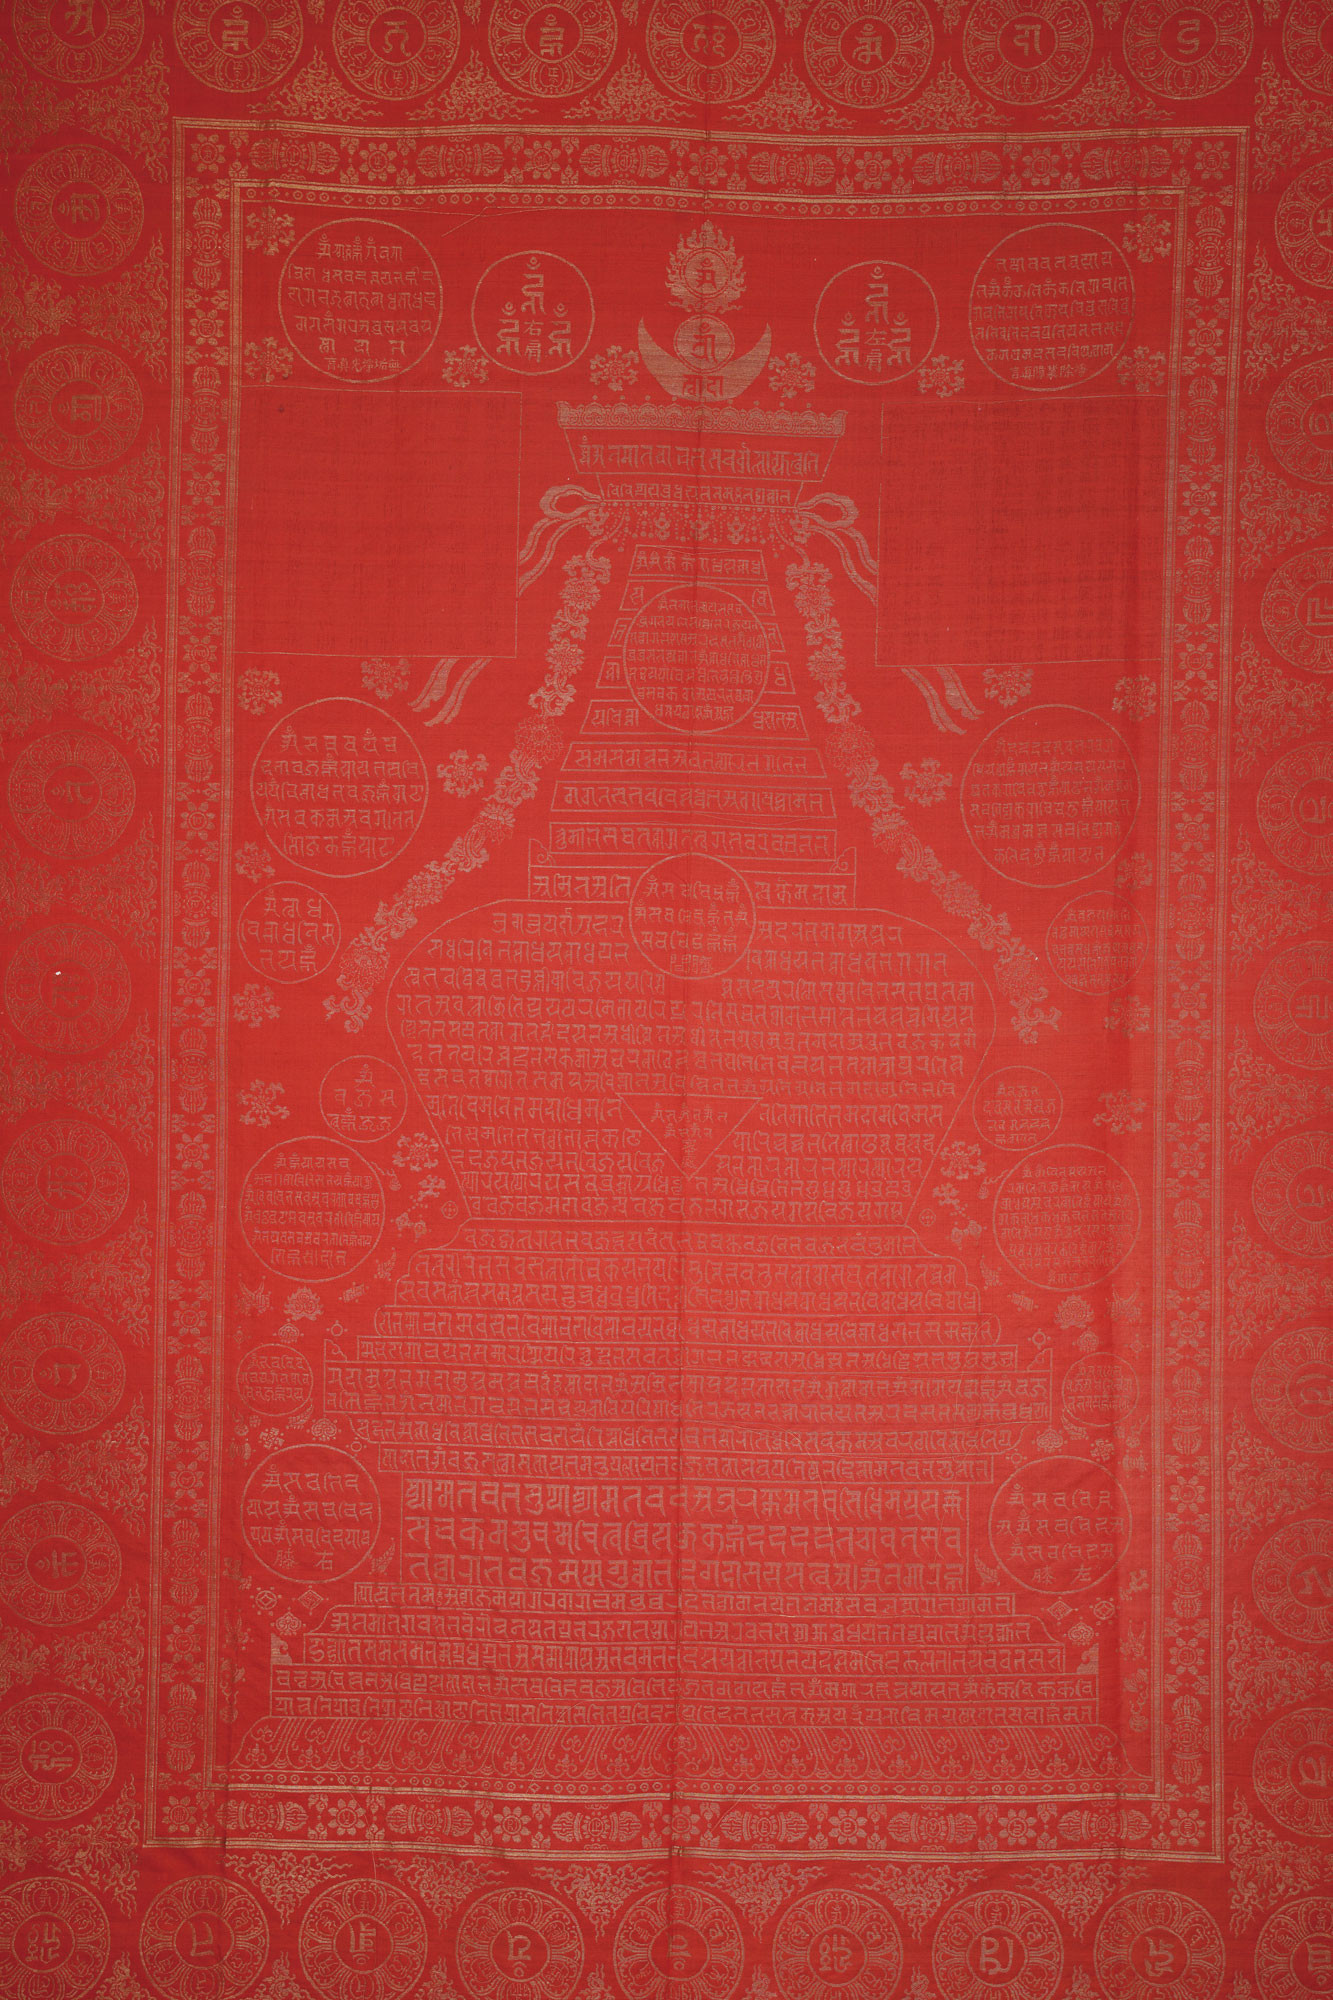 A GOLD-EMBROIDERED RED DHARANI SUTRA QUILT